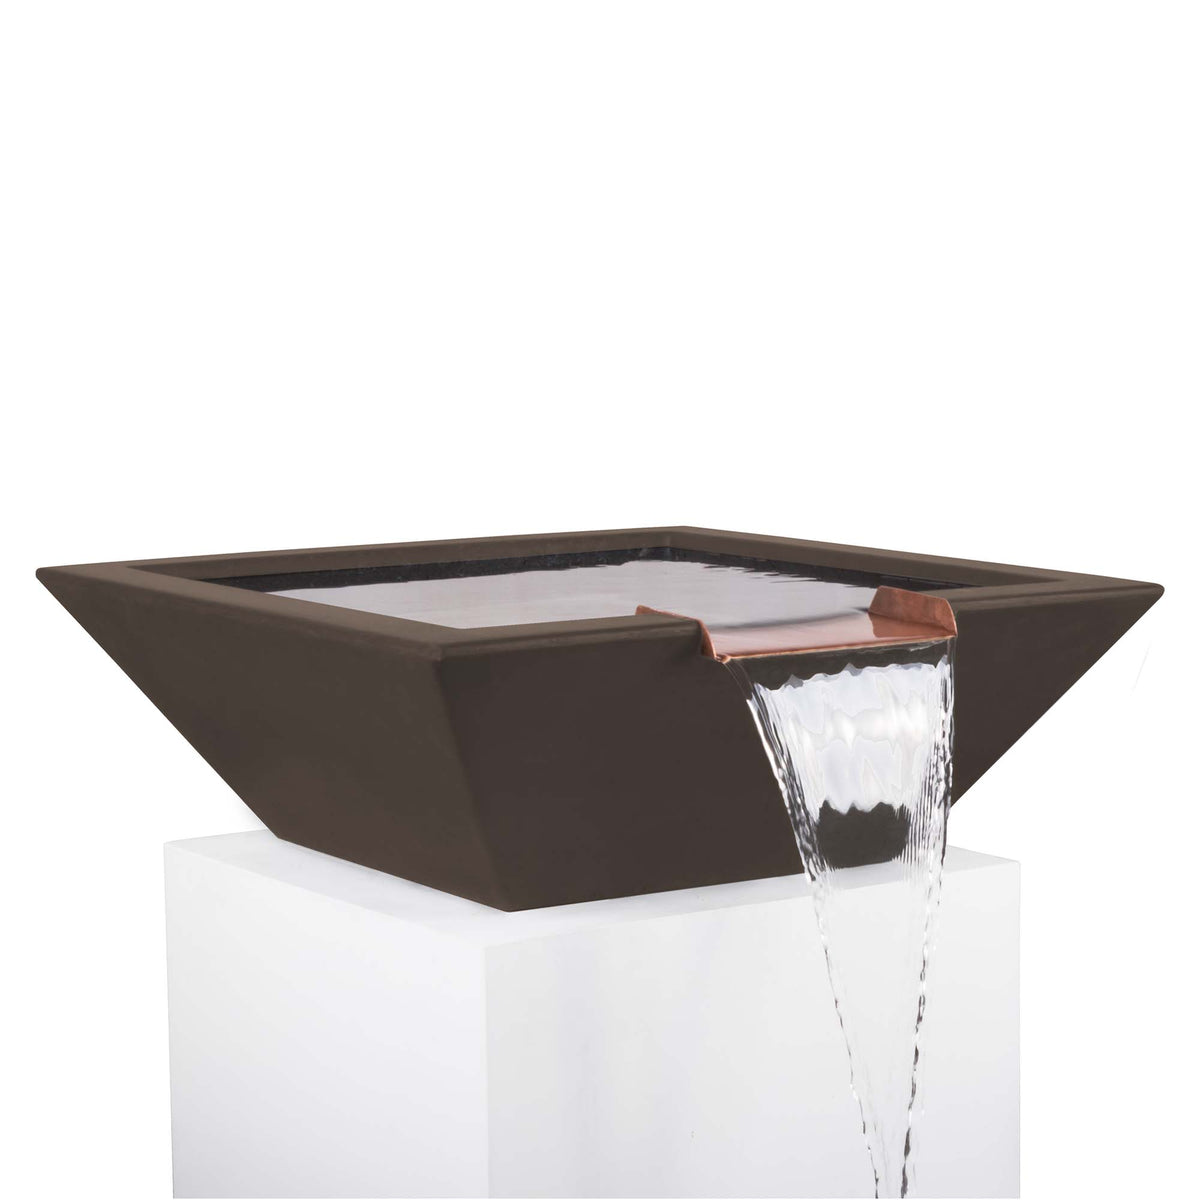 The Outdoor Plus Maya GFRC Concrete Square Water Bowl in Chocolate